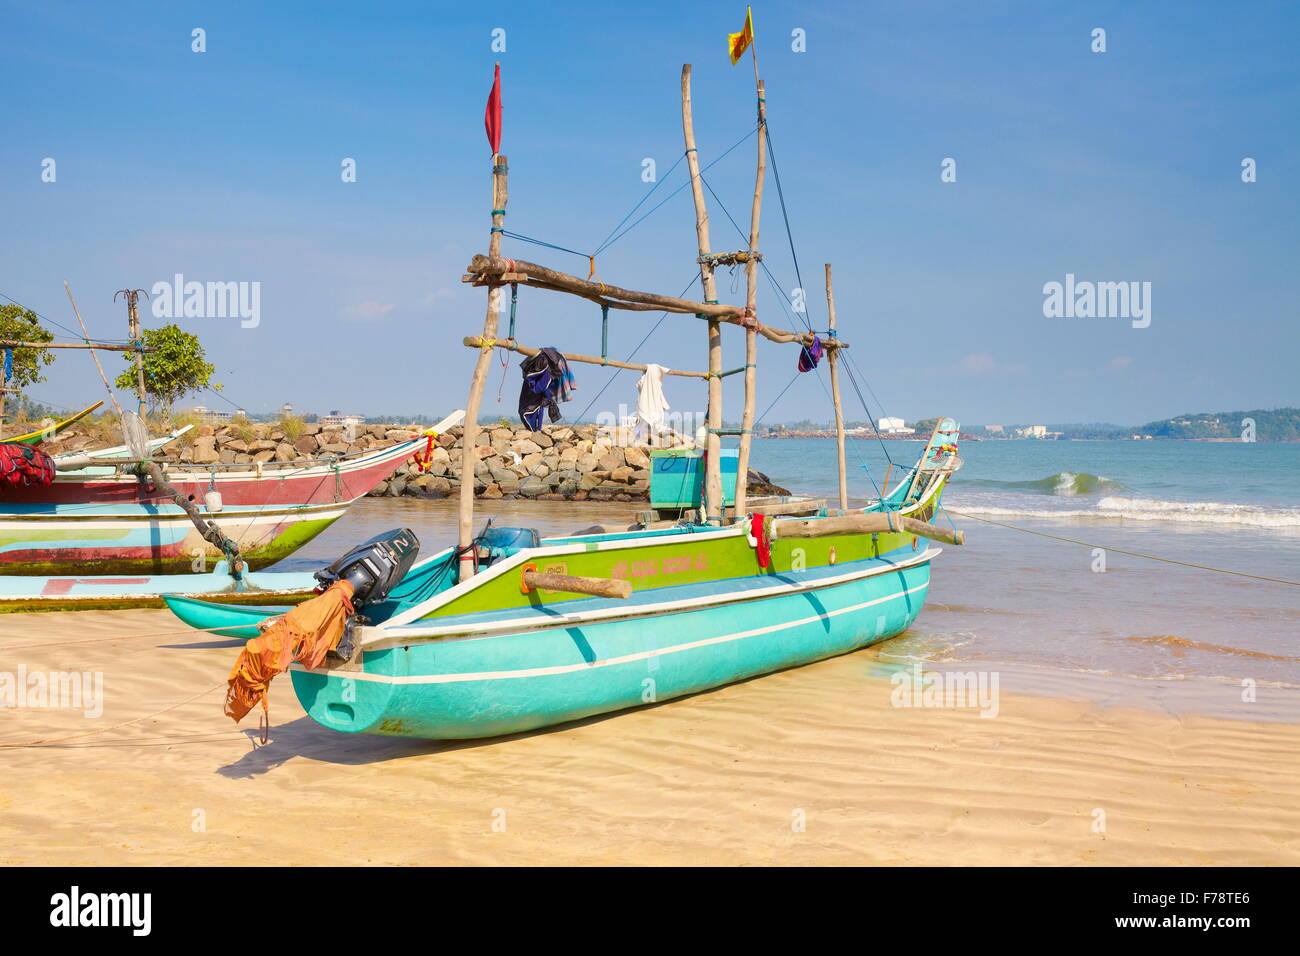 Sri Lanka - Galle,  traditional wooden painted fishing boats in the port Stock Photo